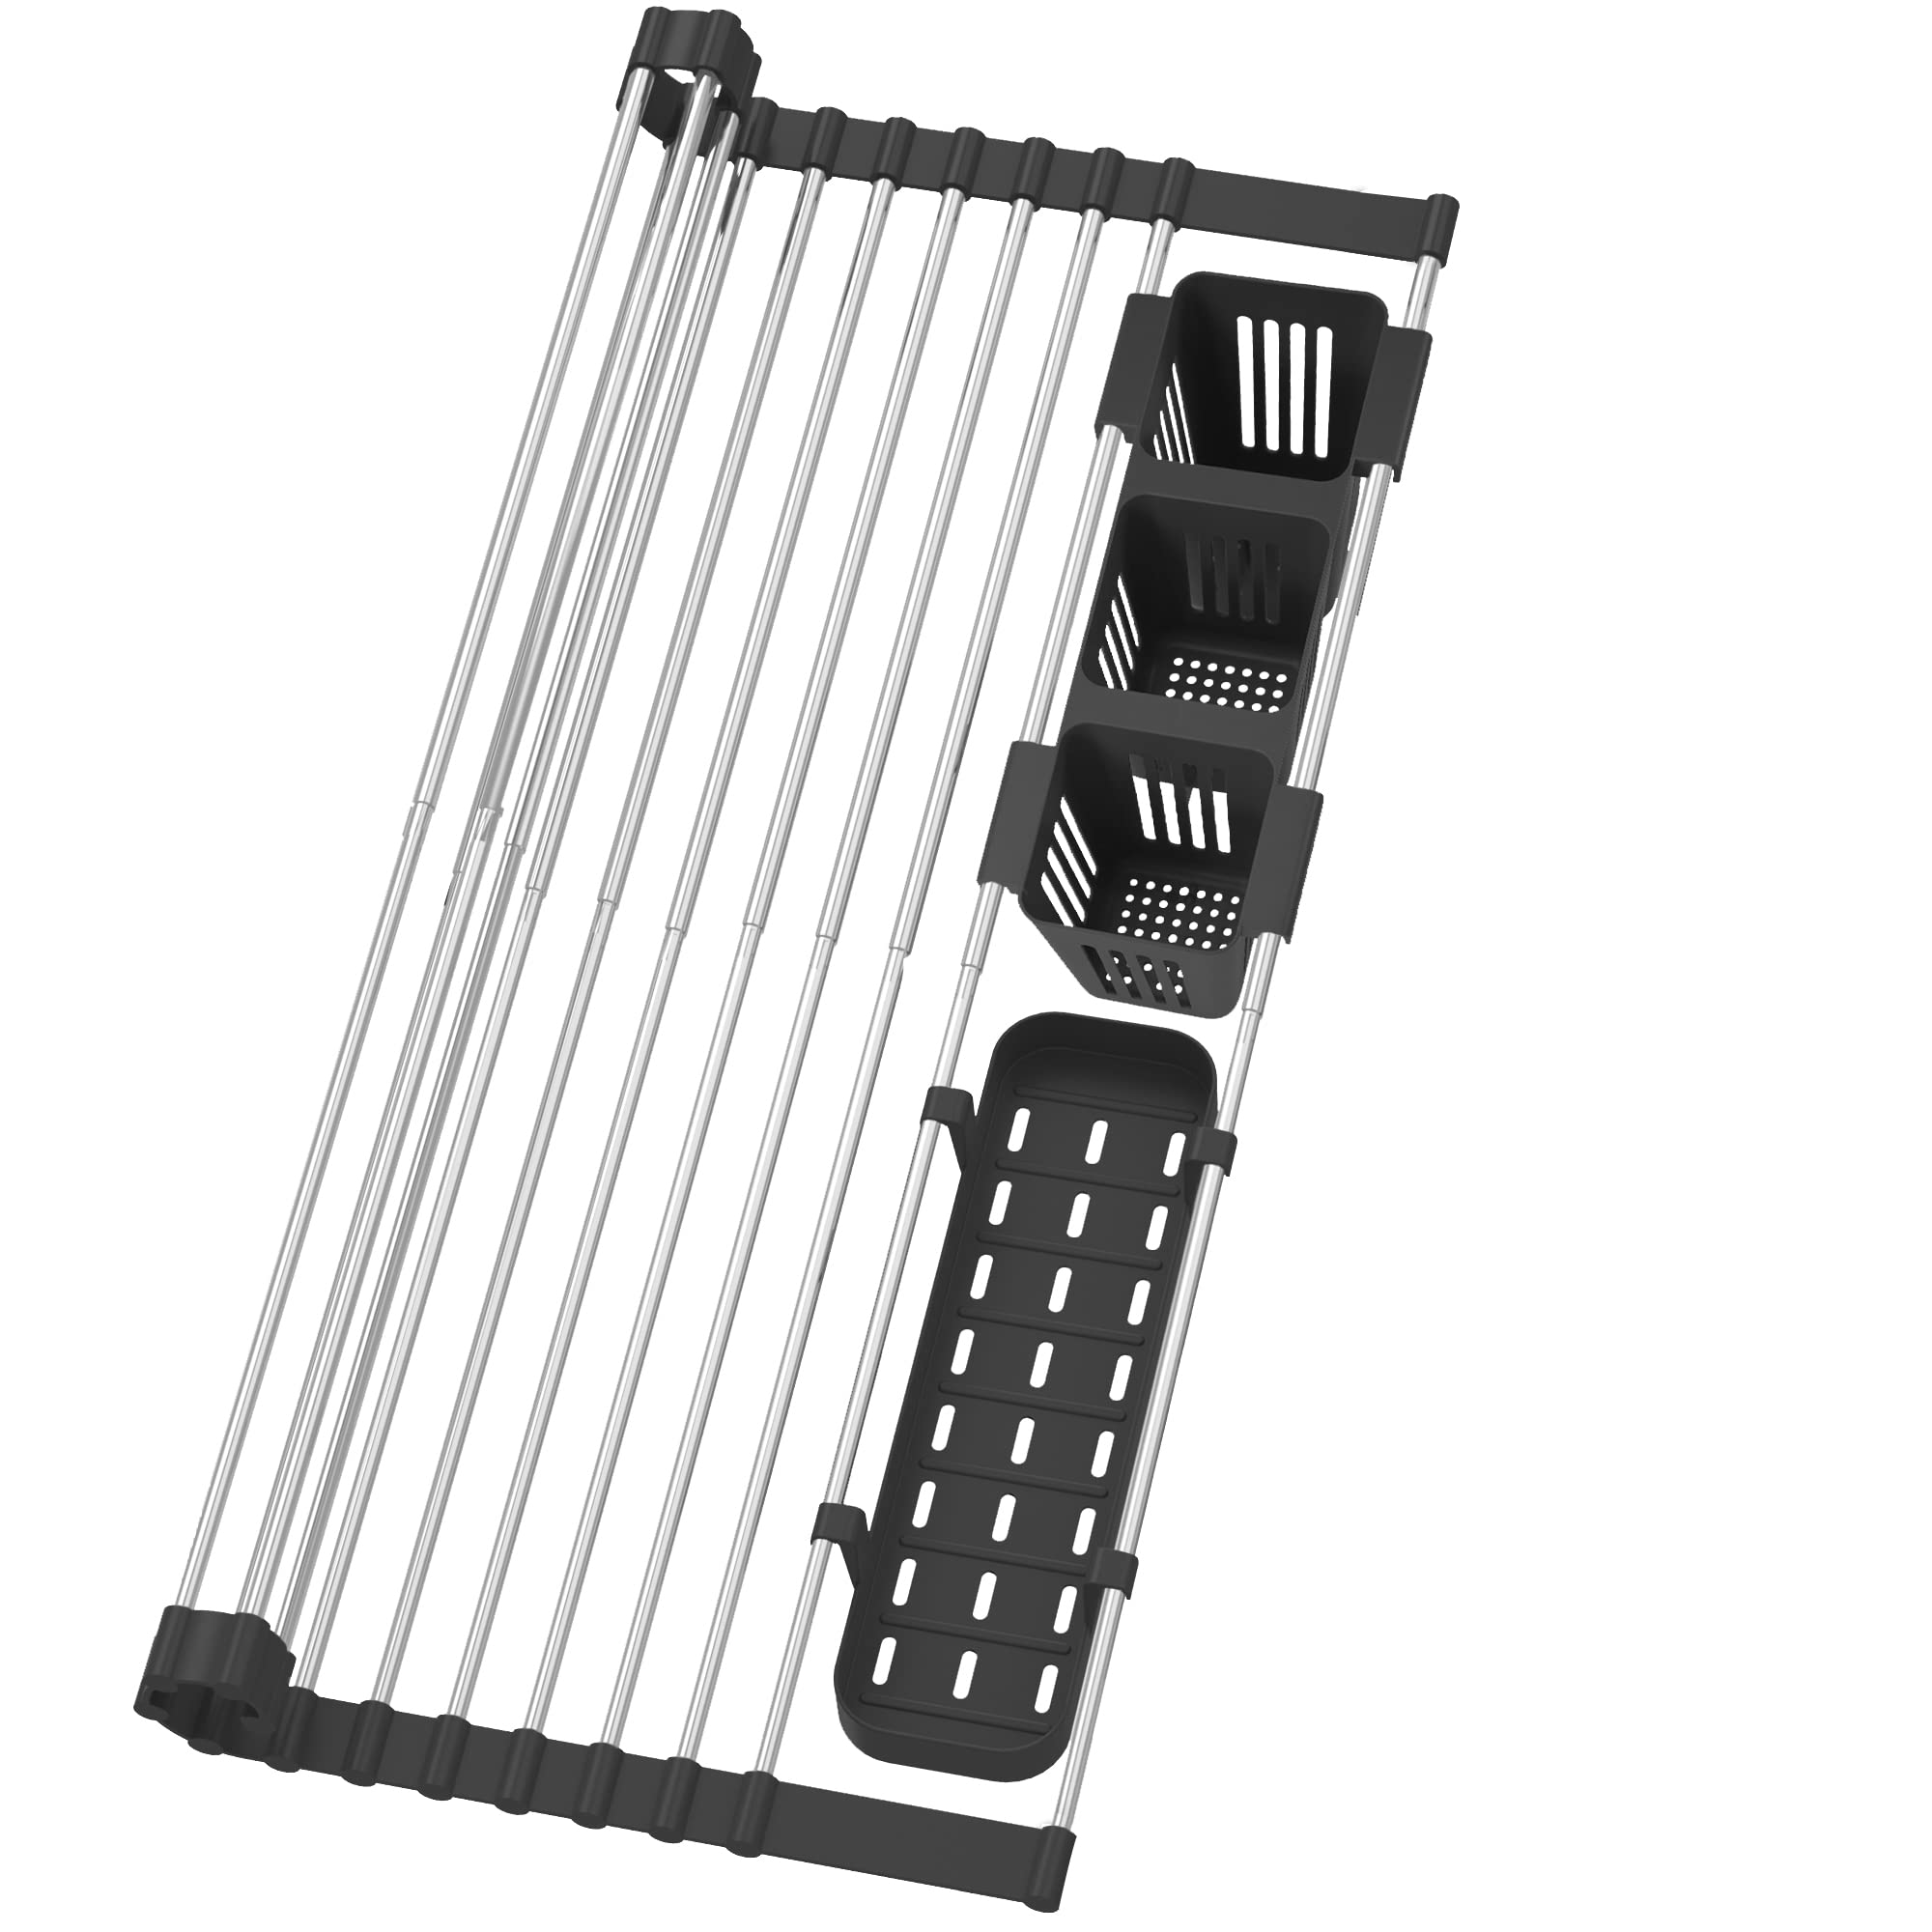 BBXTYLY Black Expandable Roll Up Dish Drying Rack Up to 228with 2 Storage Baskets,Over The Sink Kitchen Rolling up Dish Drainer Dish Dry